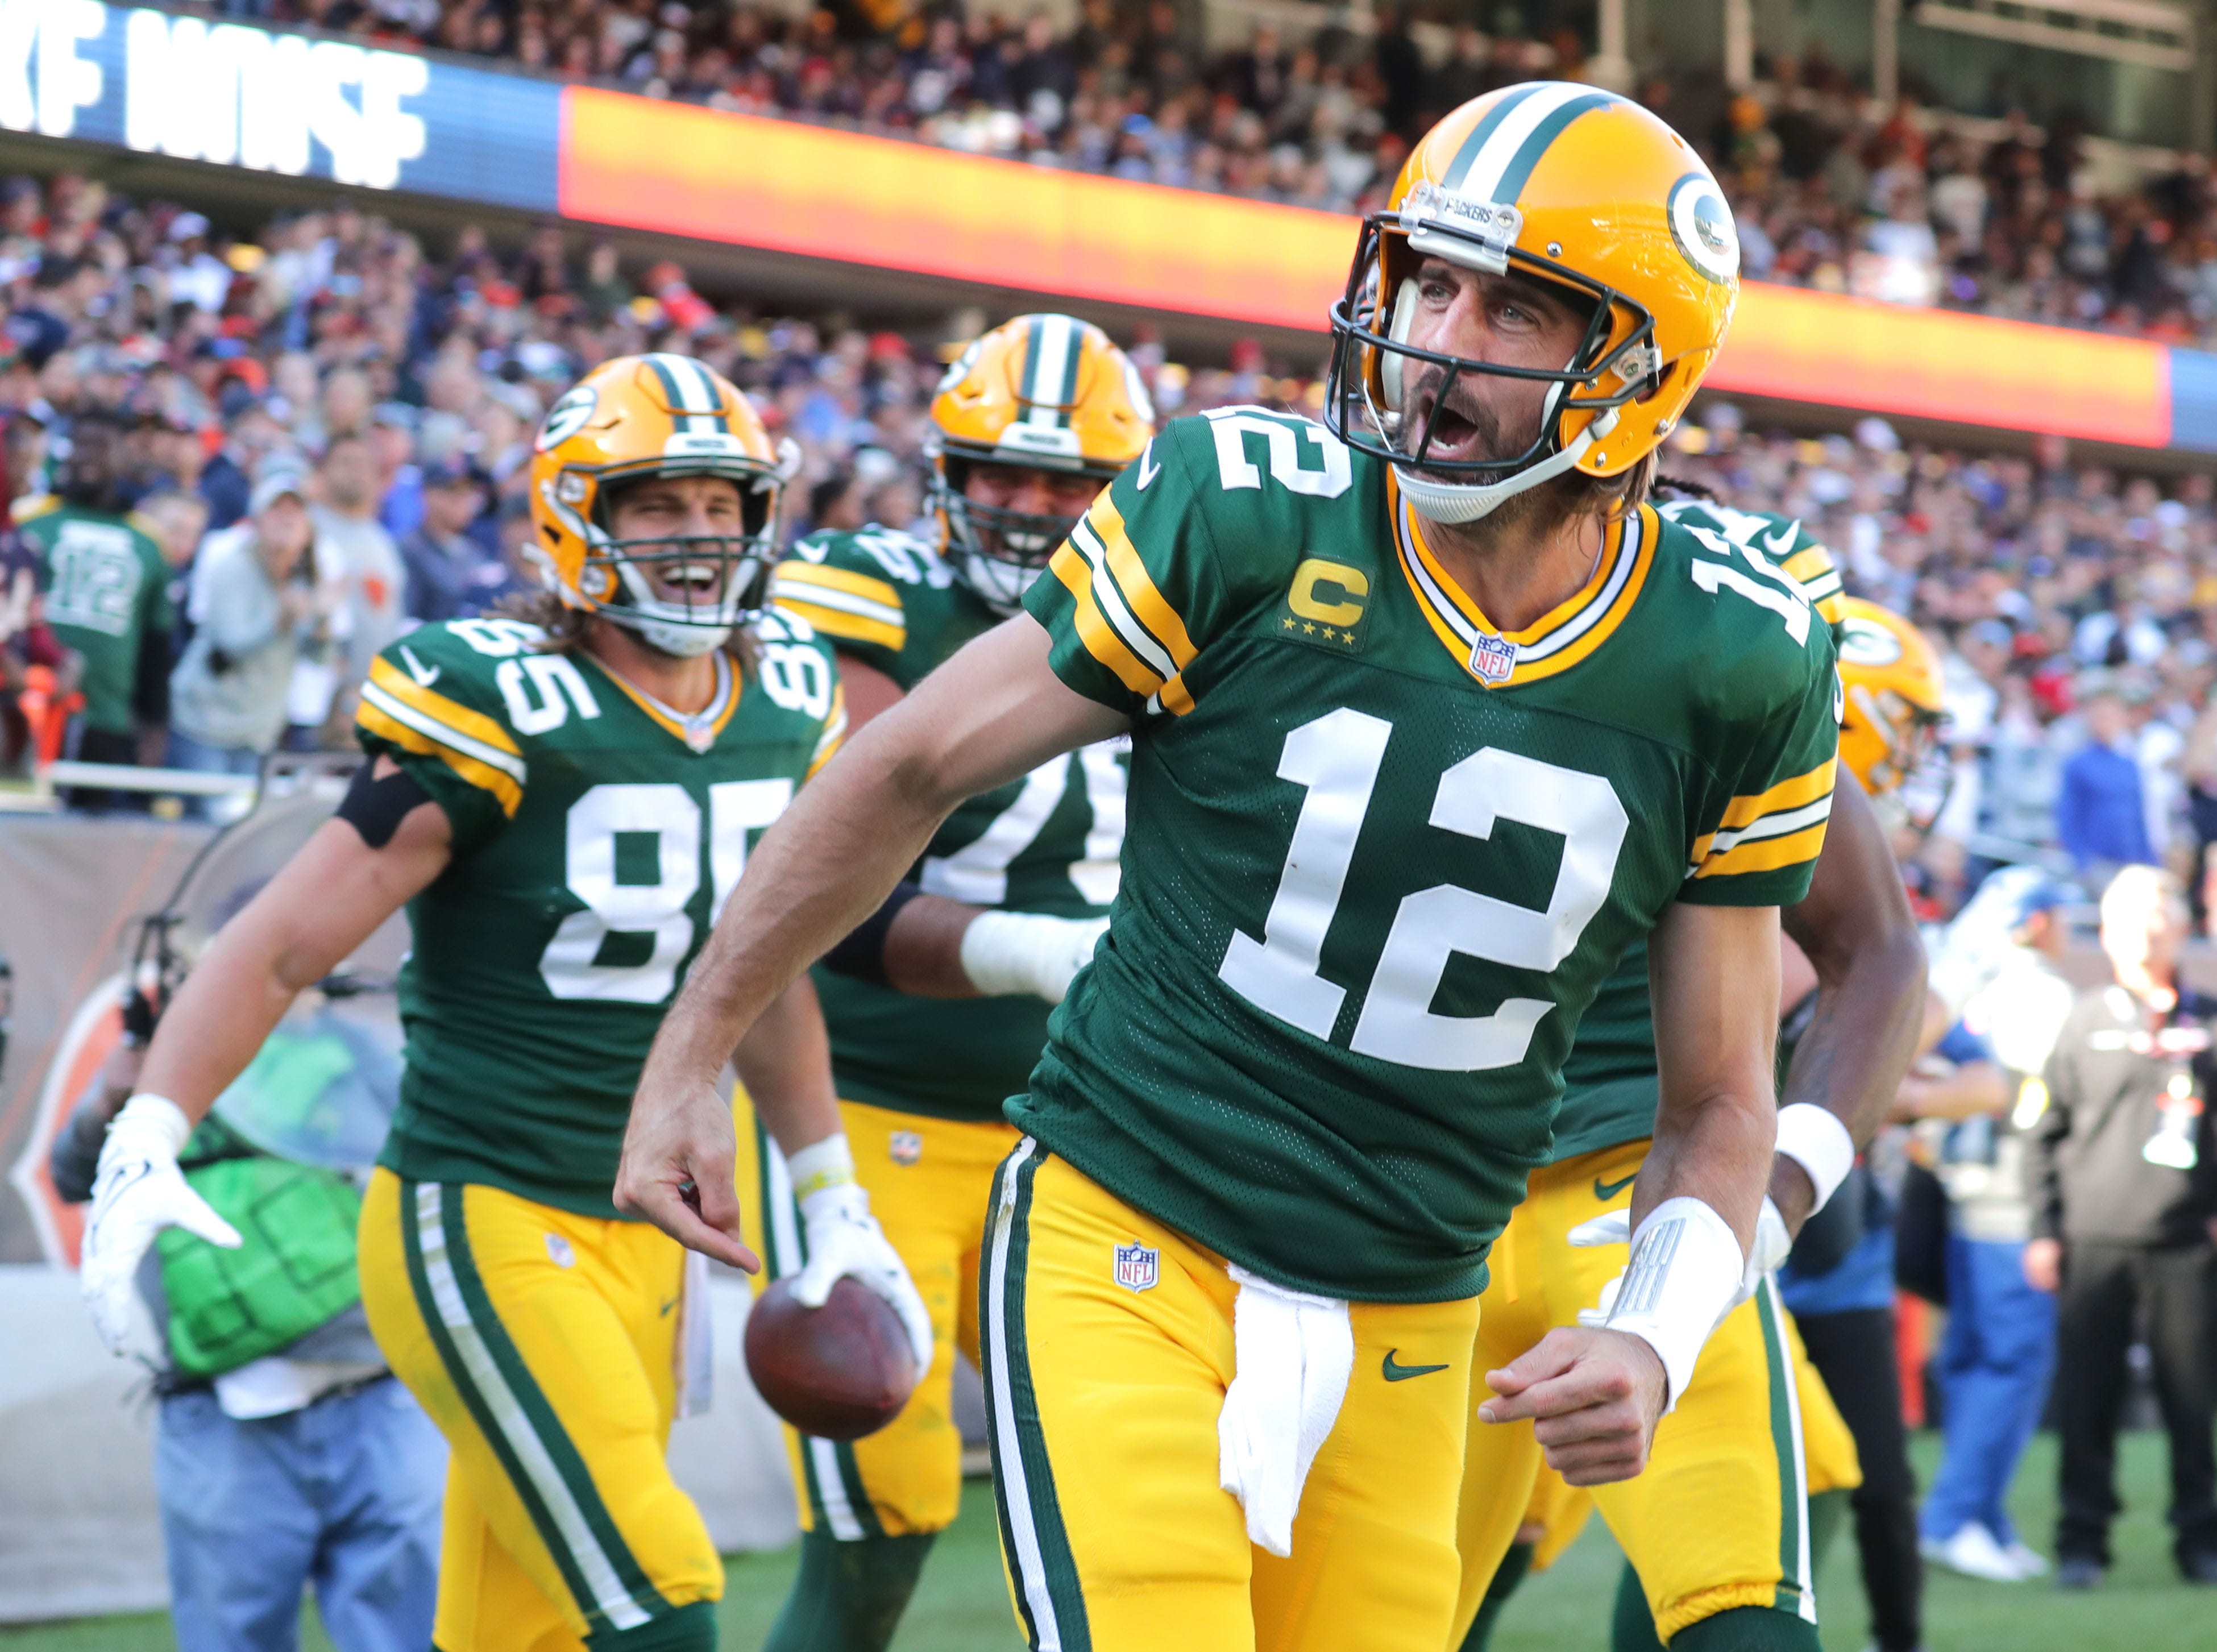 Green Bay Packers quarterback Aaron Rodgers (12) celebrates his rushing touchdown during the fourth quarter of the Green Bay Packers' 24-14 win at Soldier Field in Chicago on Sunday, Oct. 17, 2021. He shouted at fans "I own you, I still own you." Those comments went viral.